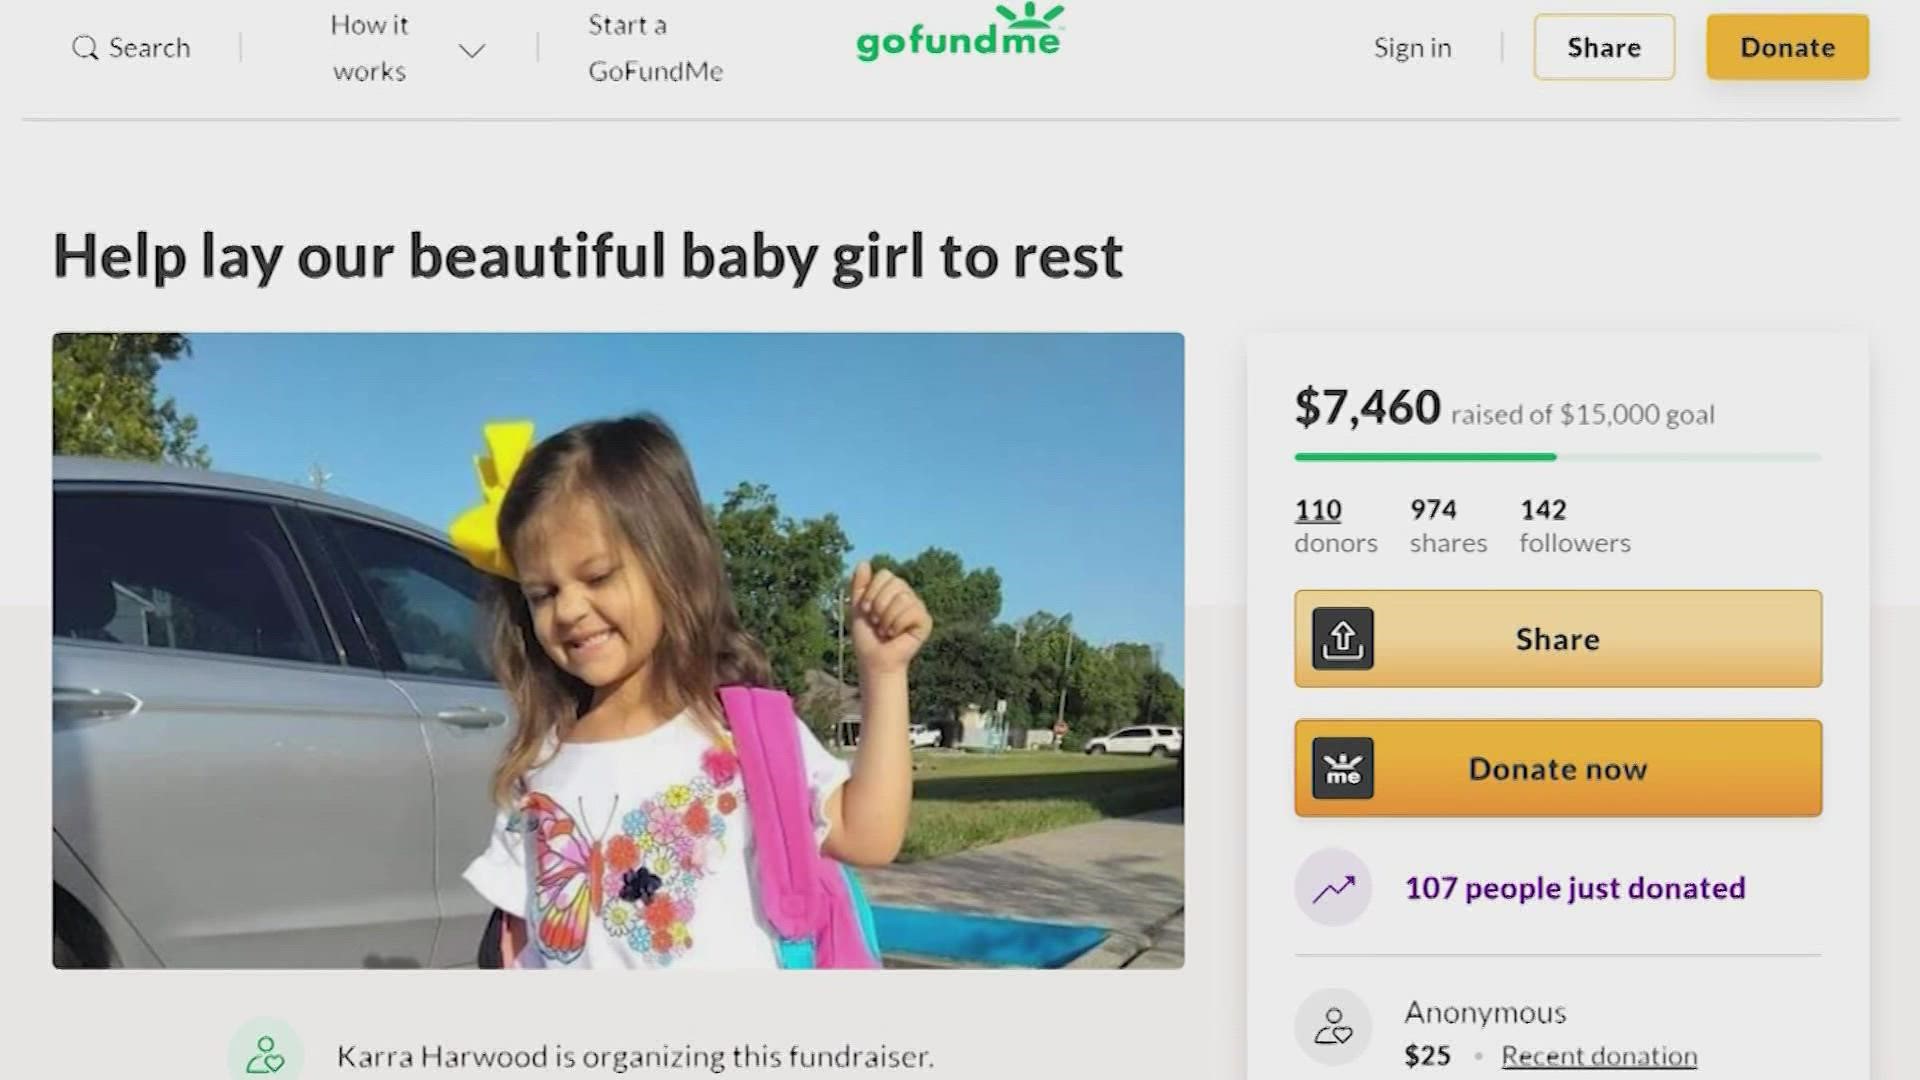 KHOU 11's Brittany Ford reports the little girl reportedly had a fever the night before she suddenly passed away